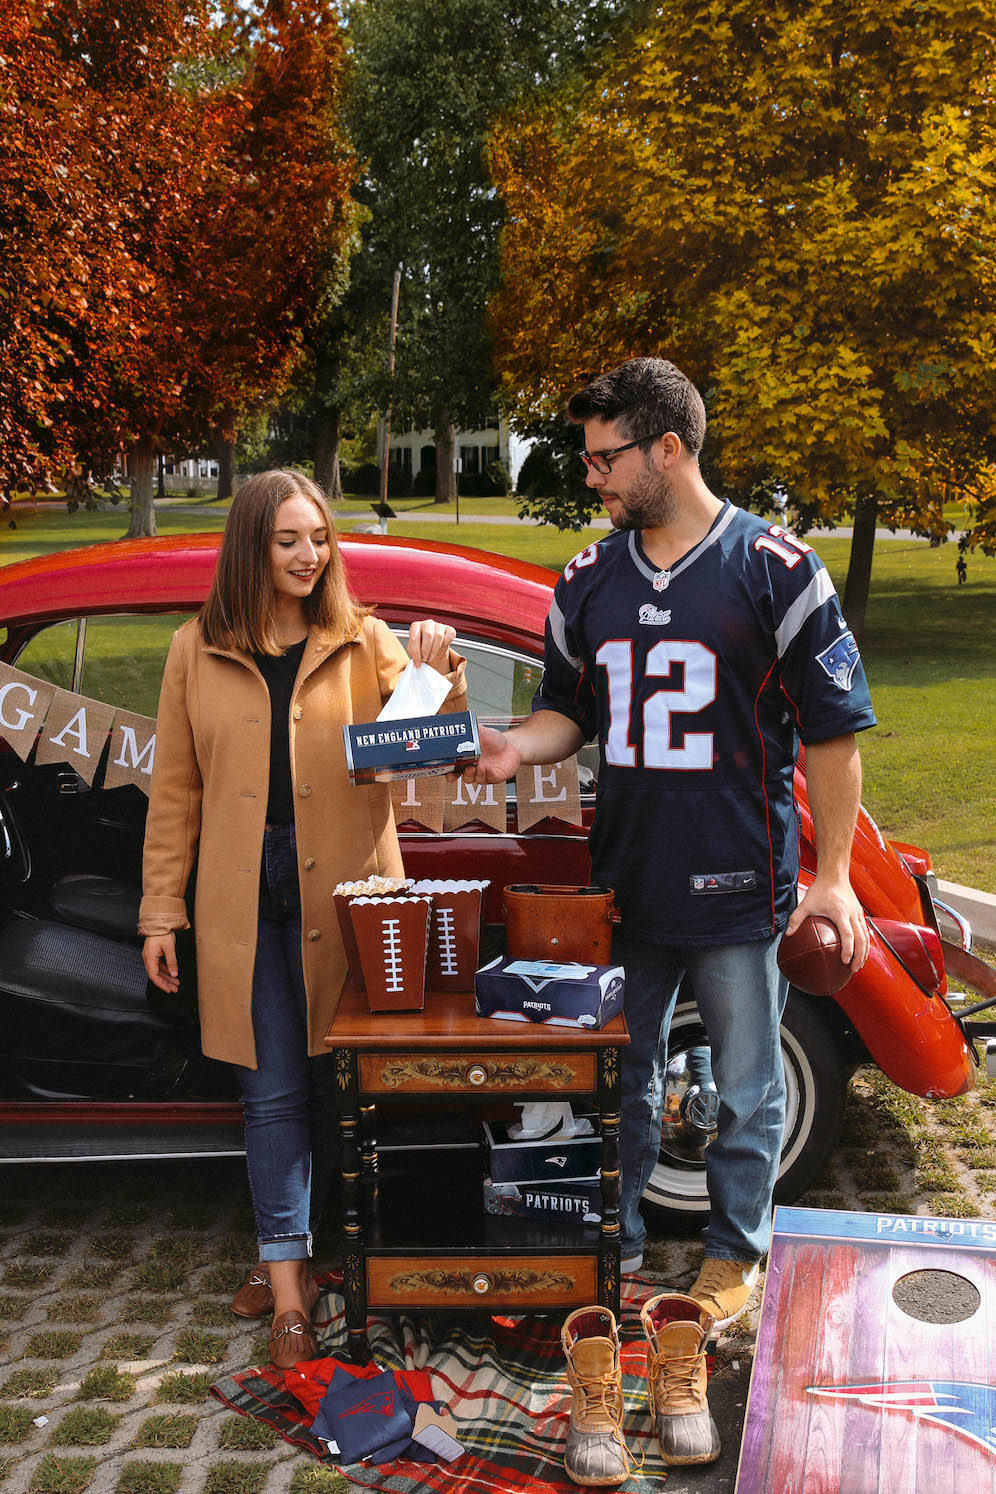 What To Pack for Tailgate at Foxborough The Coastal Confidence Aubrey Yandow